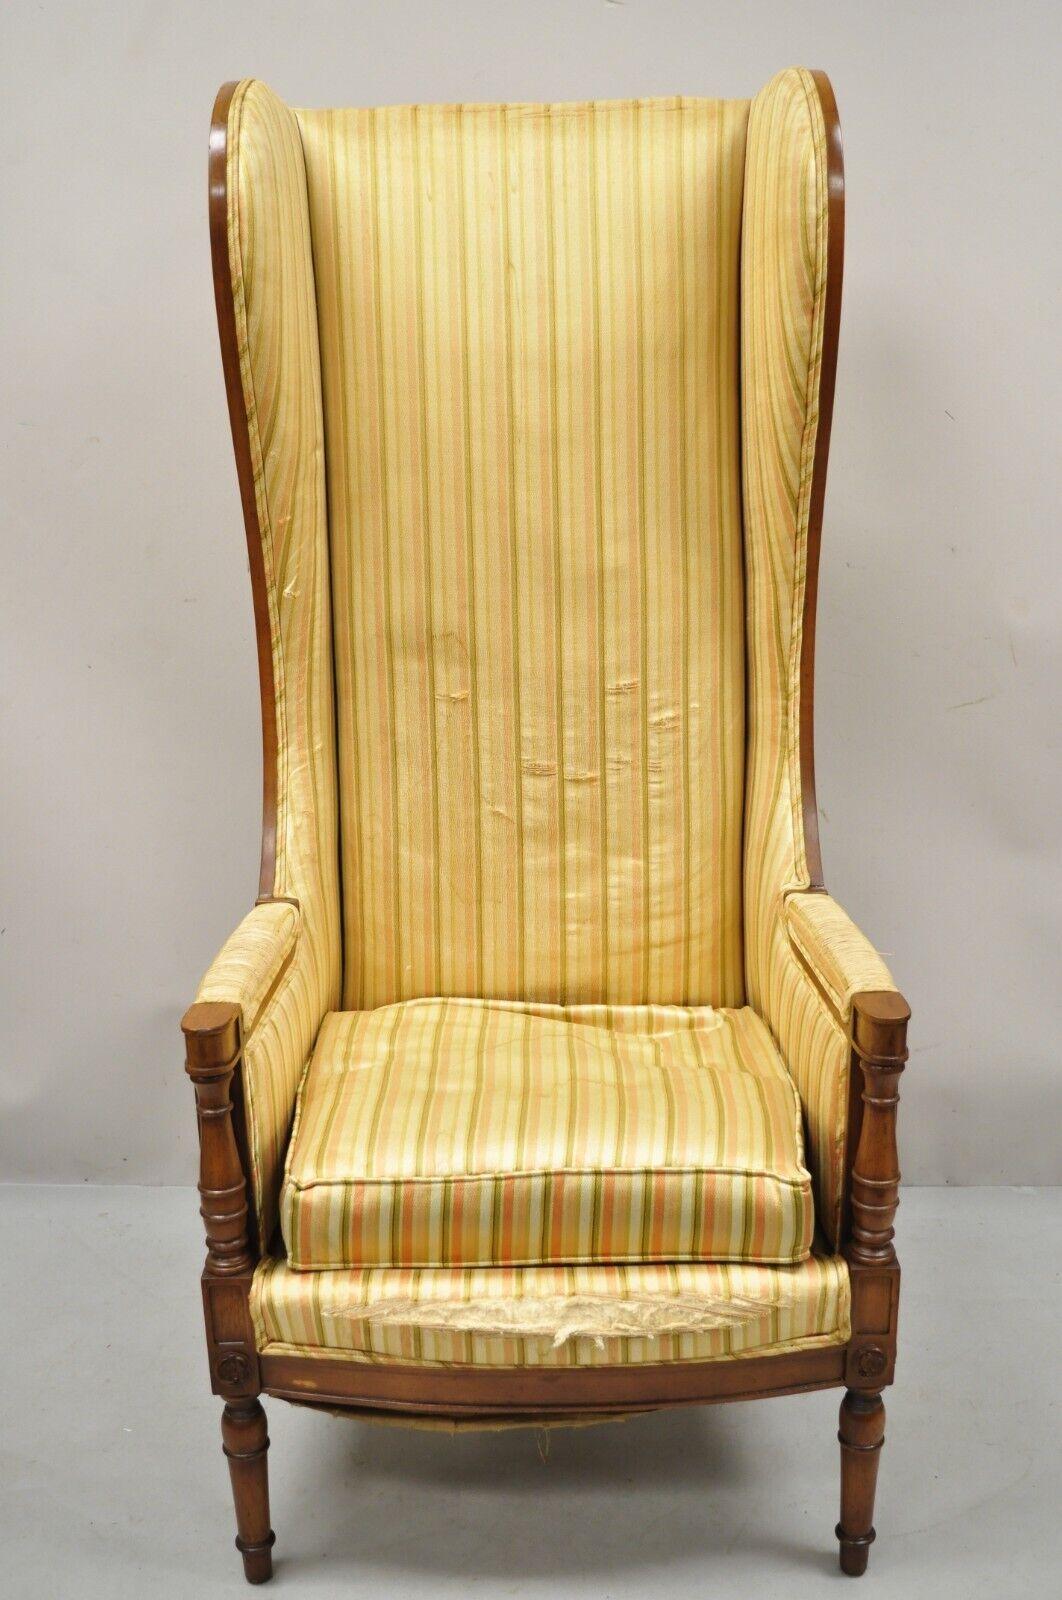 Vintage High Back French Hollywood Regency stately throne lounge arm chair. Item features a tall stately form, solid wood frame, beautiful wood grain, tapered legs, very nice vintage item, great style and form. Circa Mid 20th Century.
Measurements: